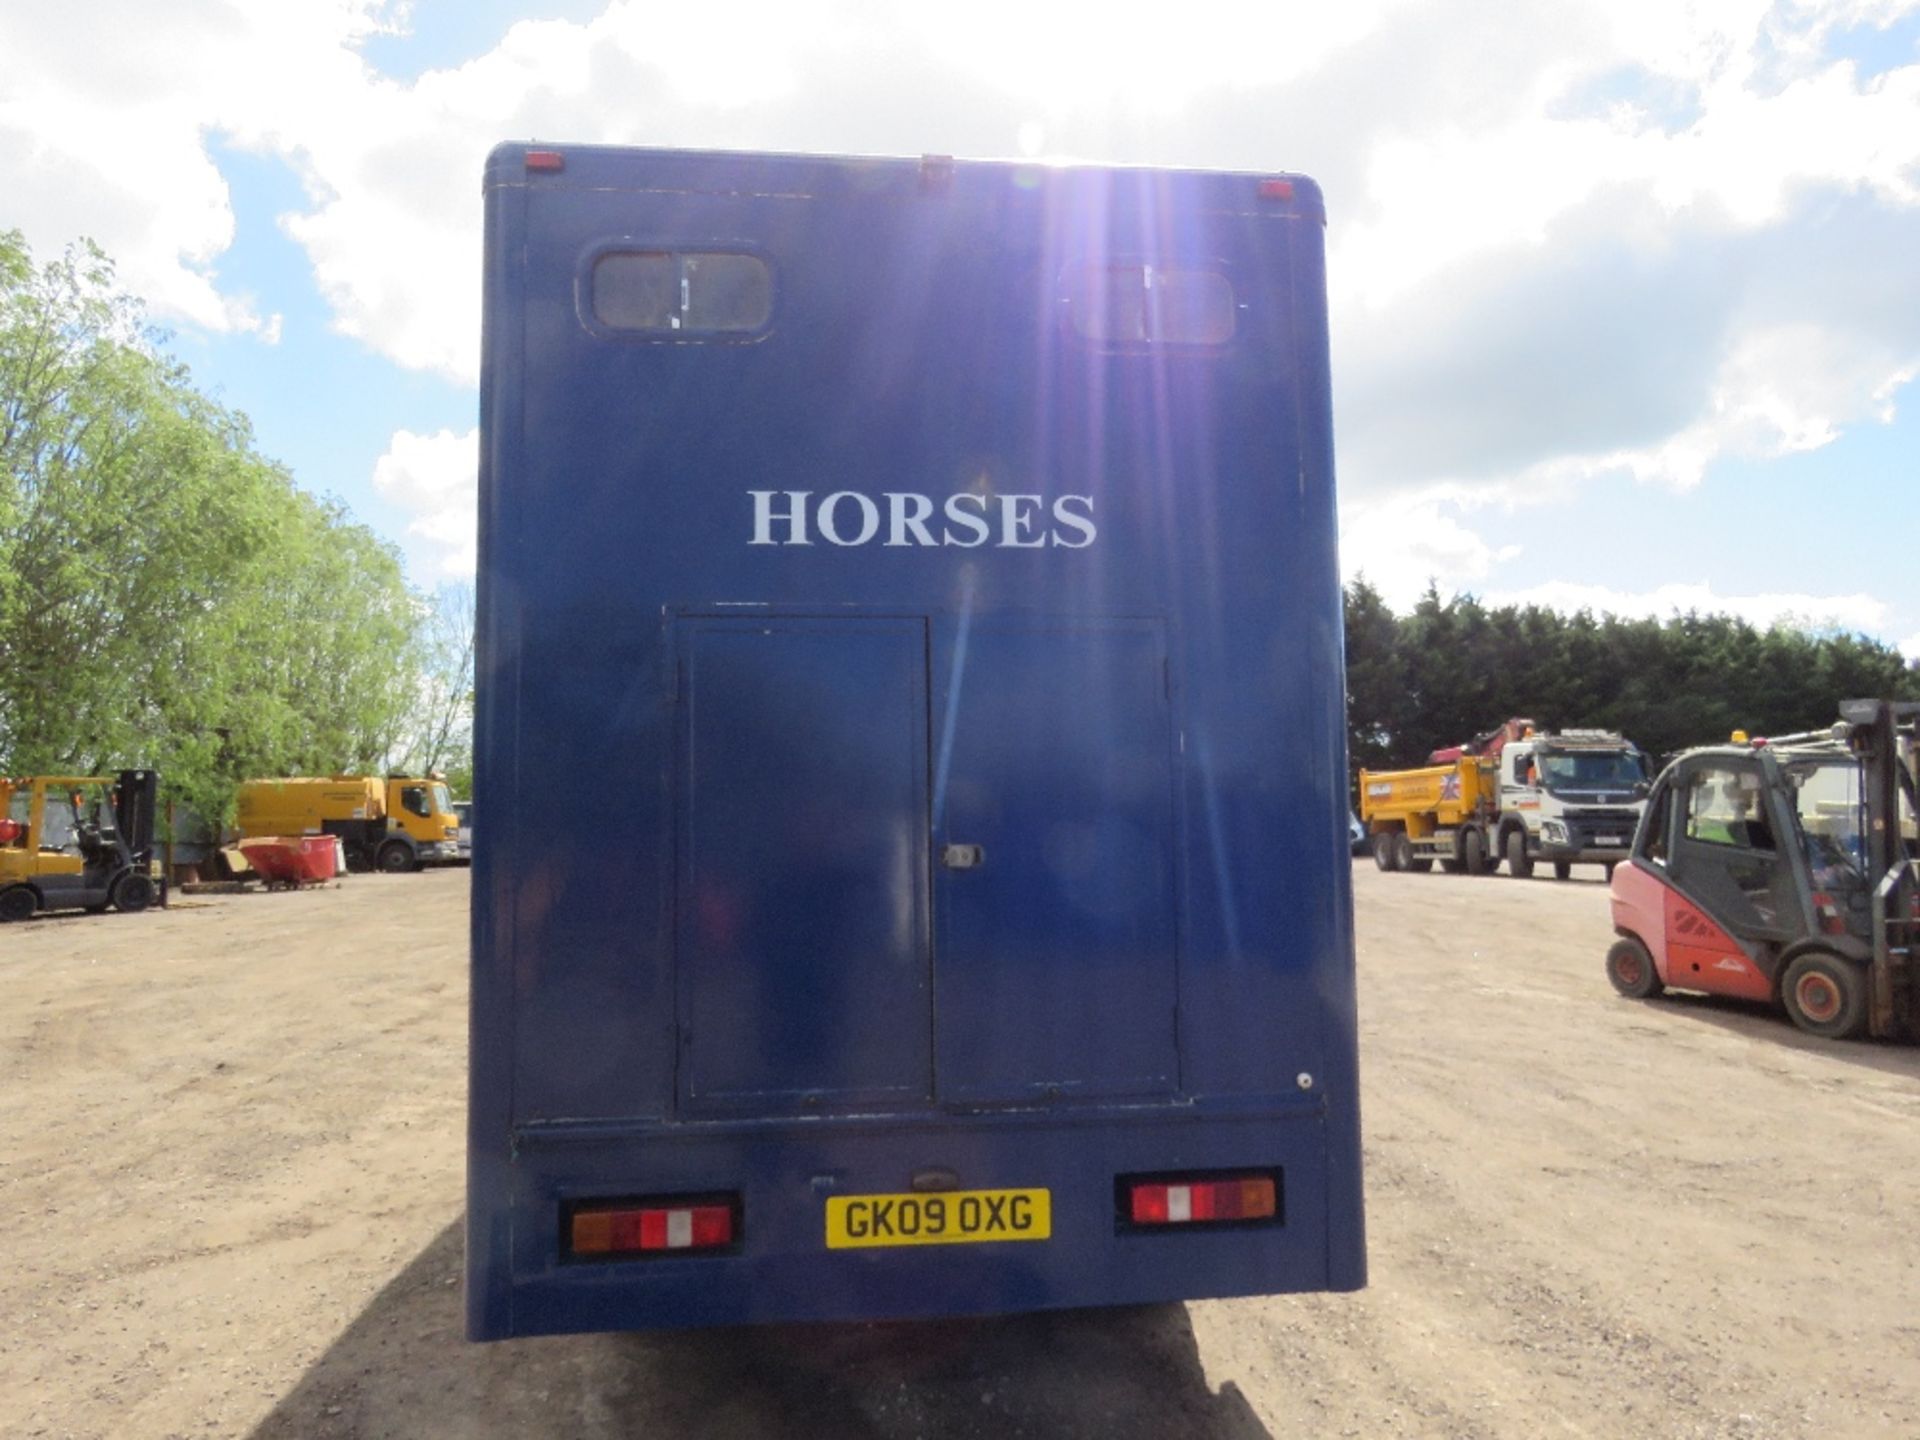 MITSUBISHI CANTER HORSE BOX LORRY REG:GK09 OXG. V5 AND PLATING CERTIFICATE IN OFFICE. MOT EXPIRED. - Image 7 of 24